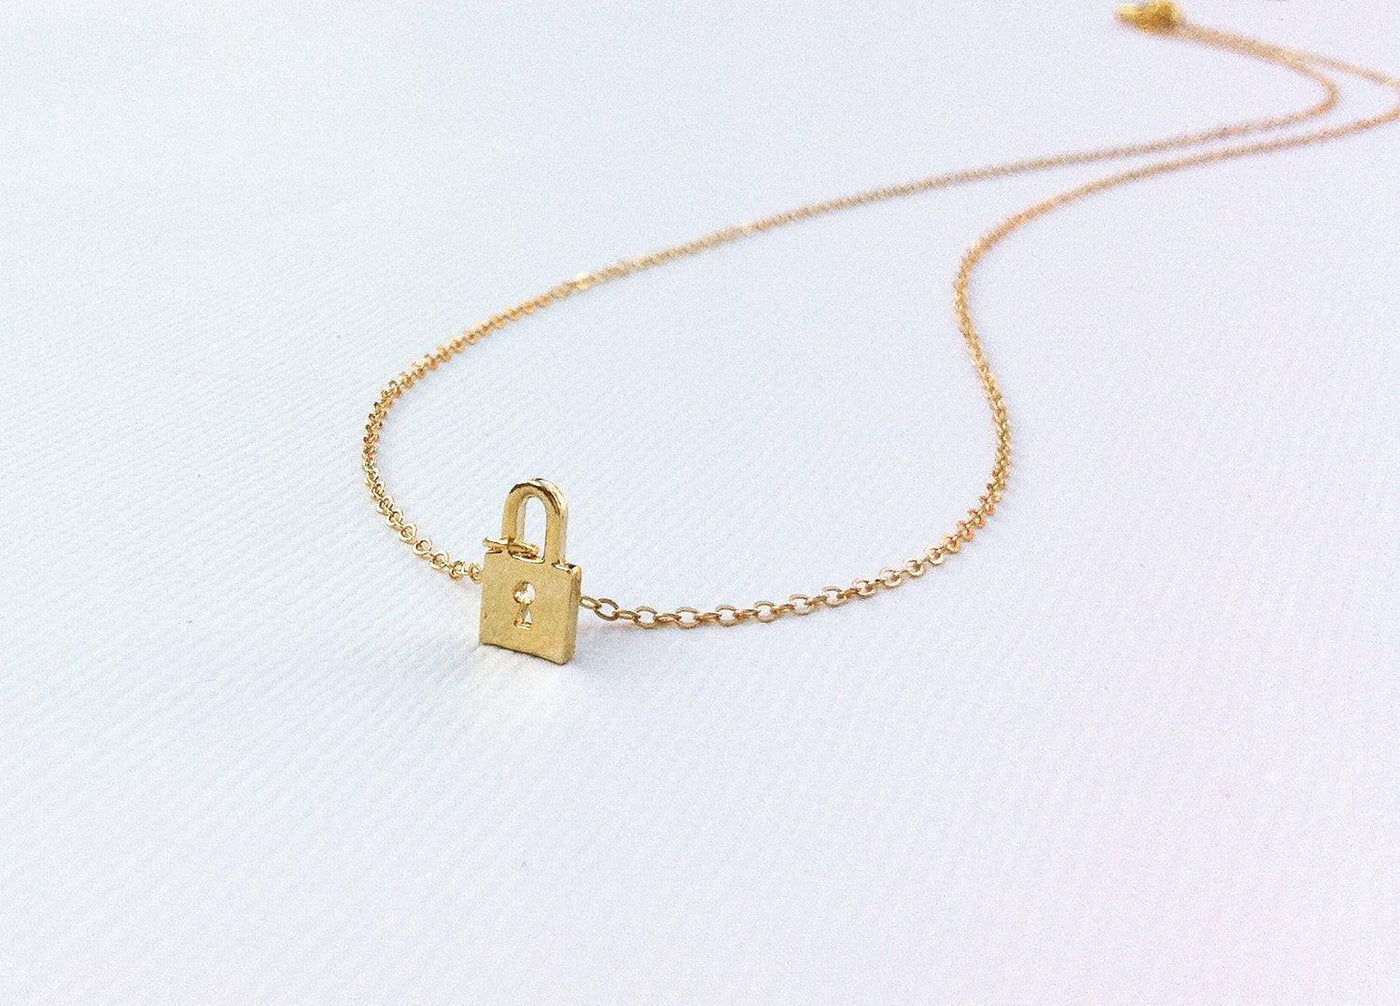 Gold necklace with small gold padlock